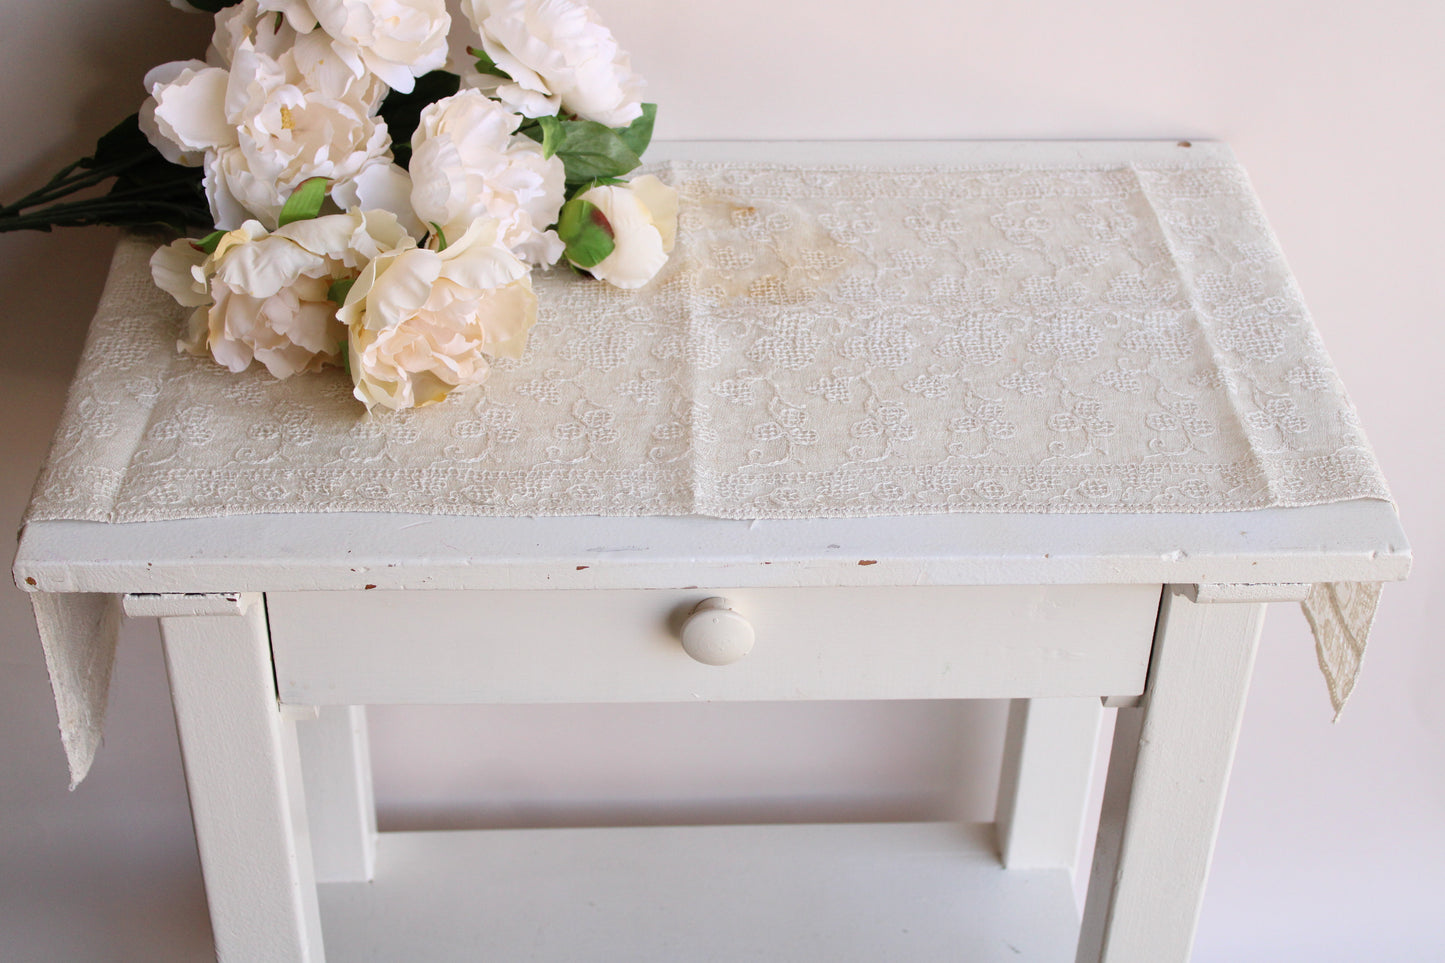 Vintage Woven and Embroidered Table Runner